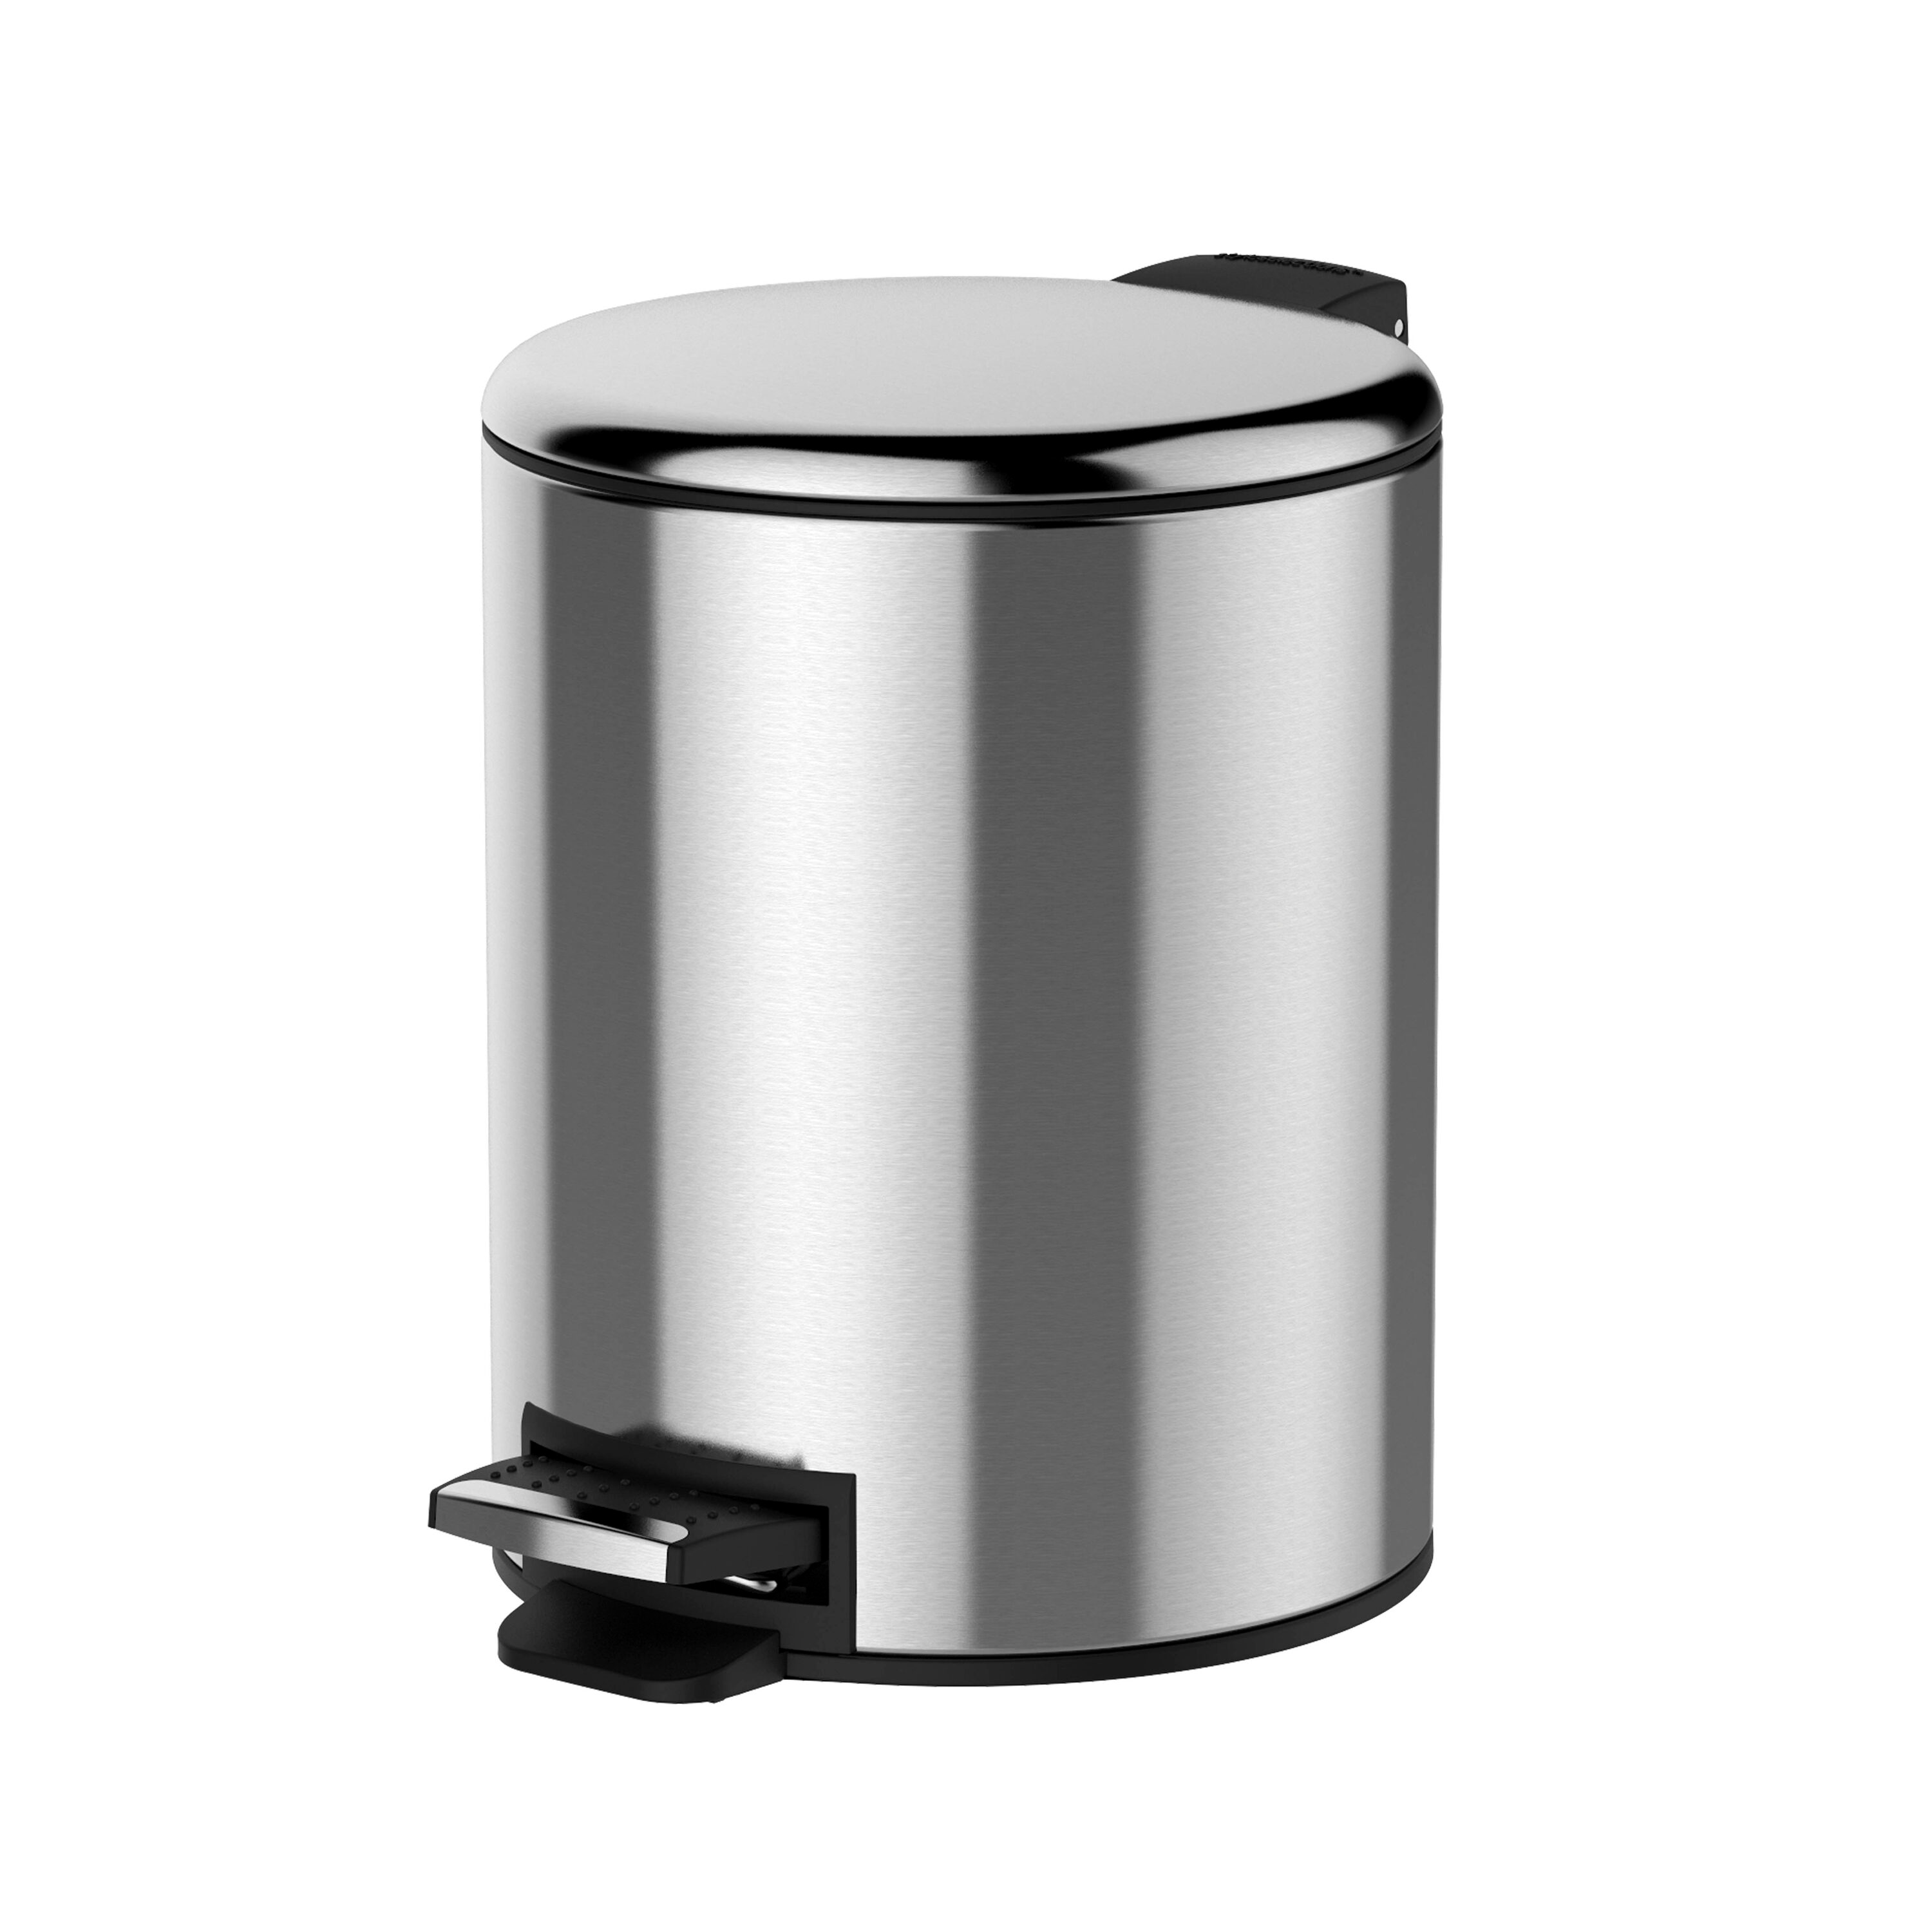 Black 13-Gallon Kitchen Trash Can with Foot Pedal Step Lid - On Sale - Bed  Bath & Beyond - 32072441